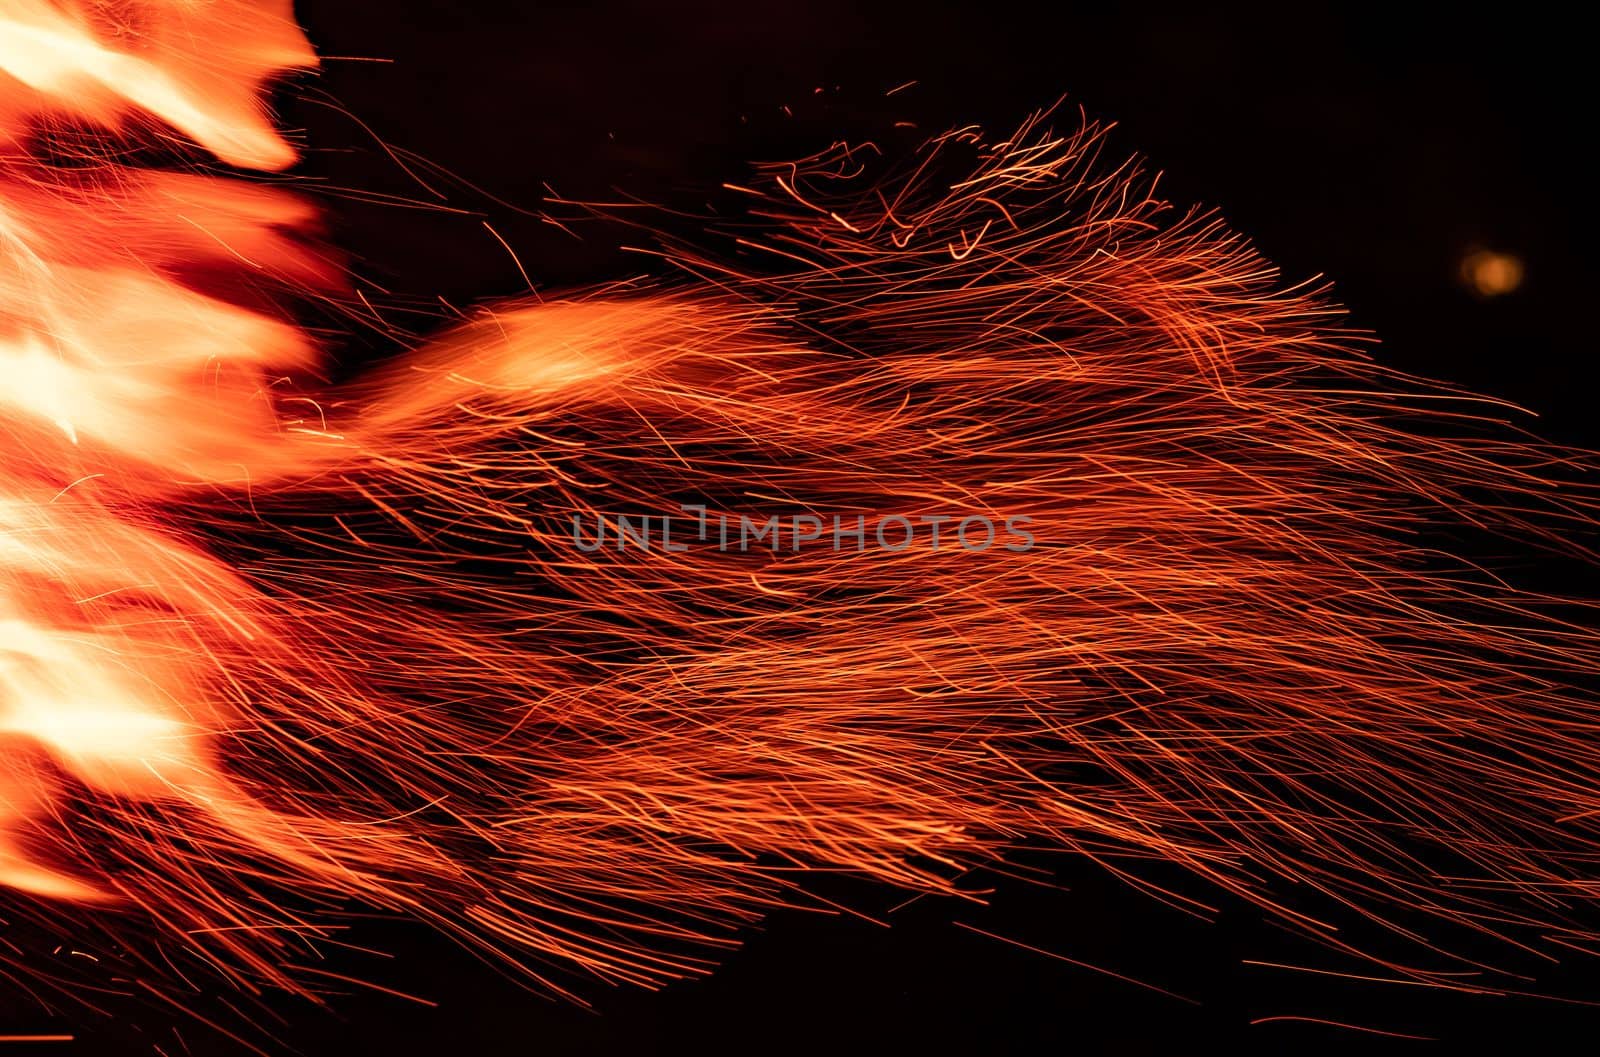 Campfire flame isolated on black background by GekaSkr